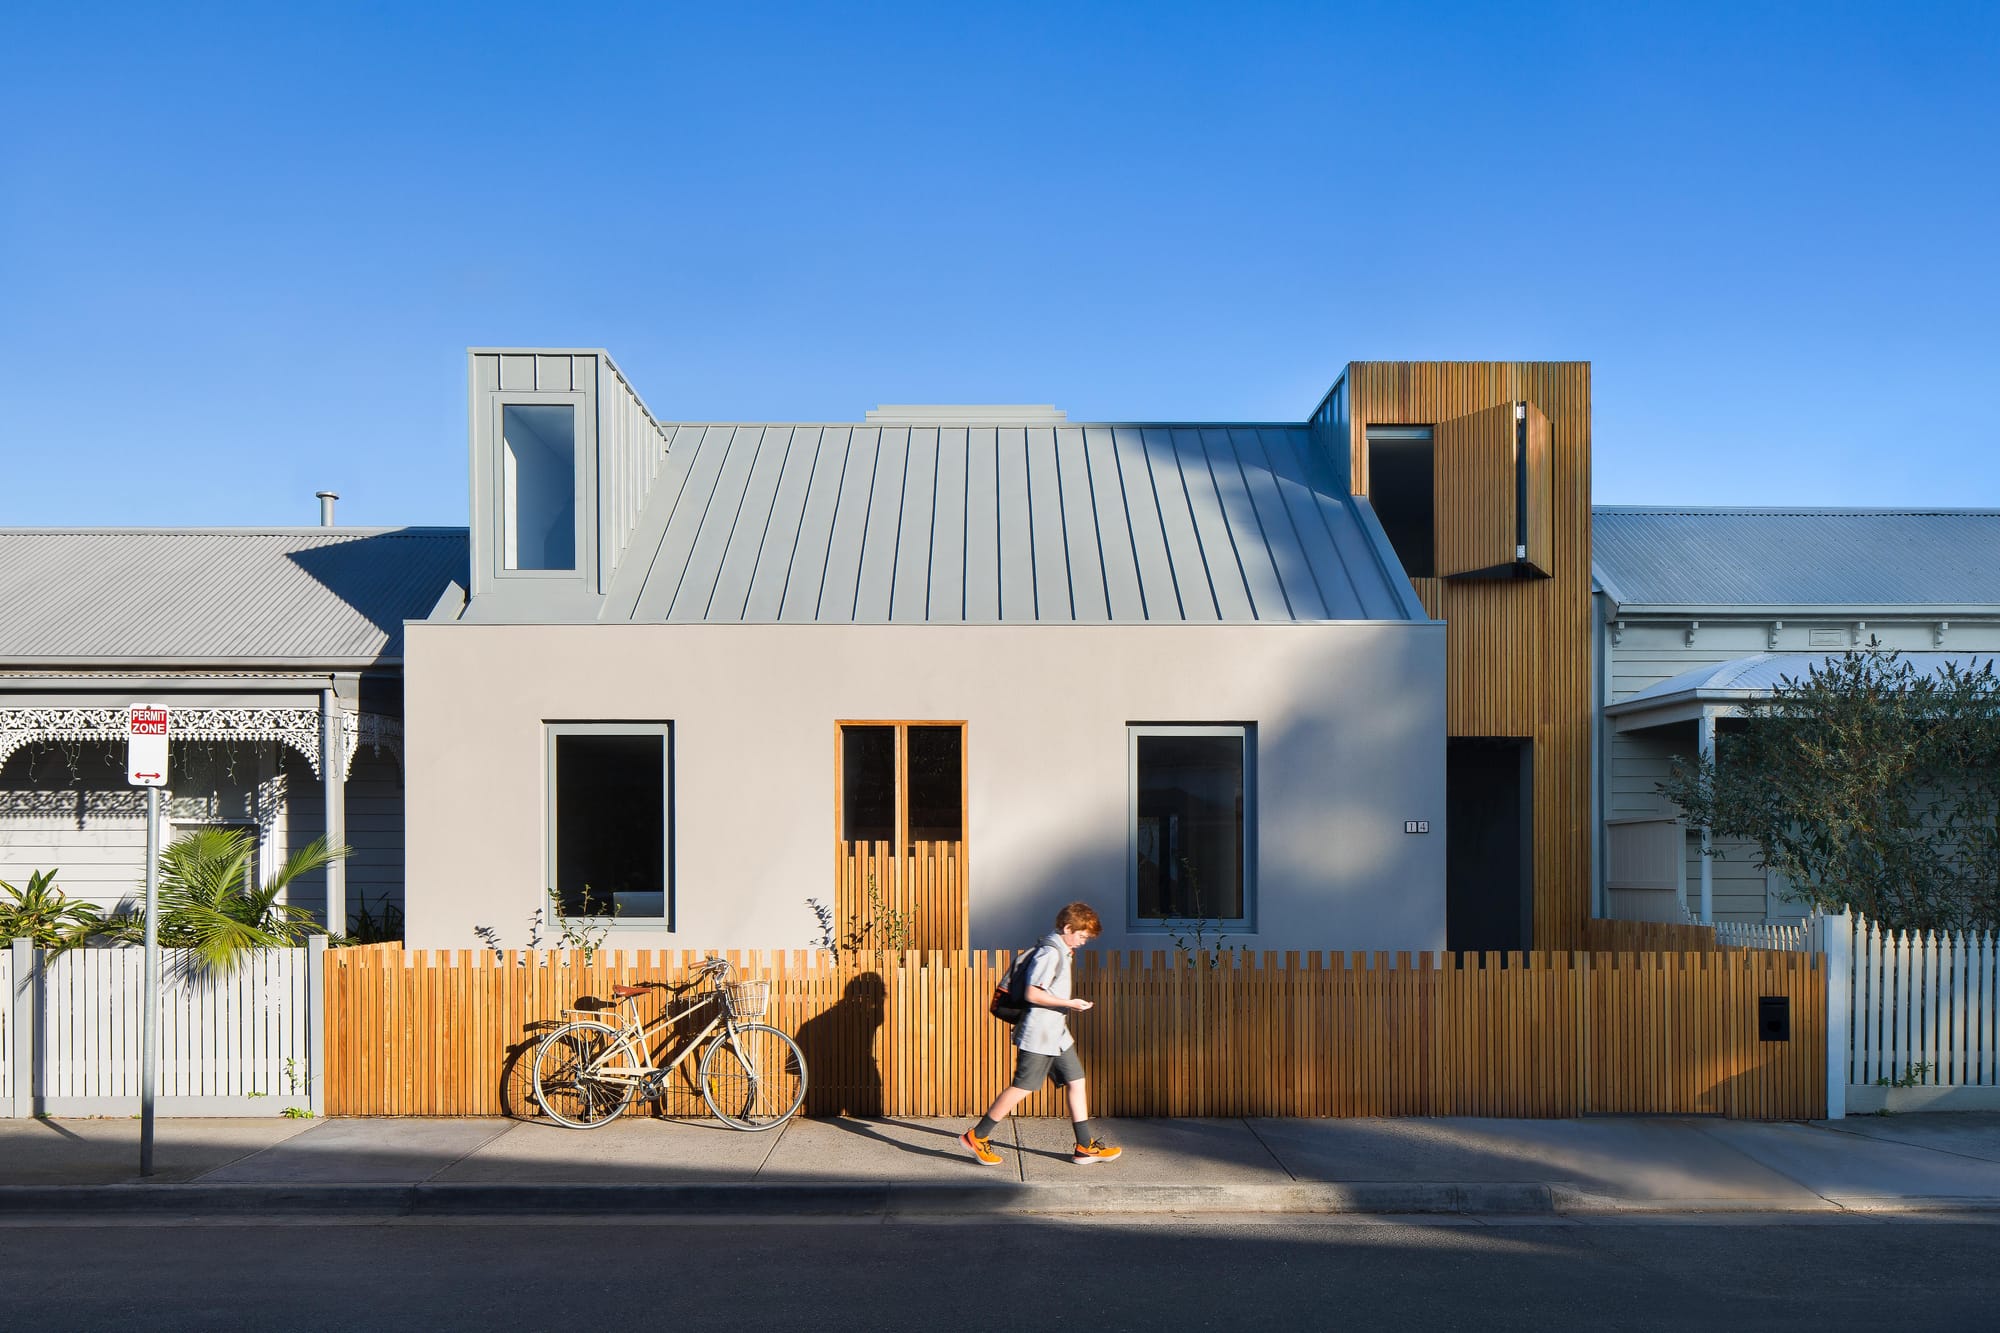  Cremorne House by Trethowan. Photography by Emily Bartlett. Residential home with simple facade. Timber batten fence and second story structure to the left. 